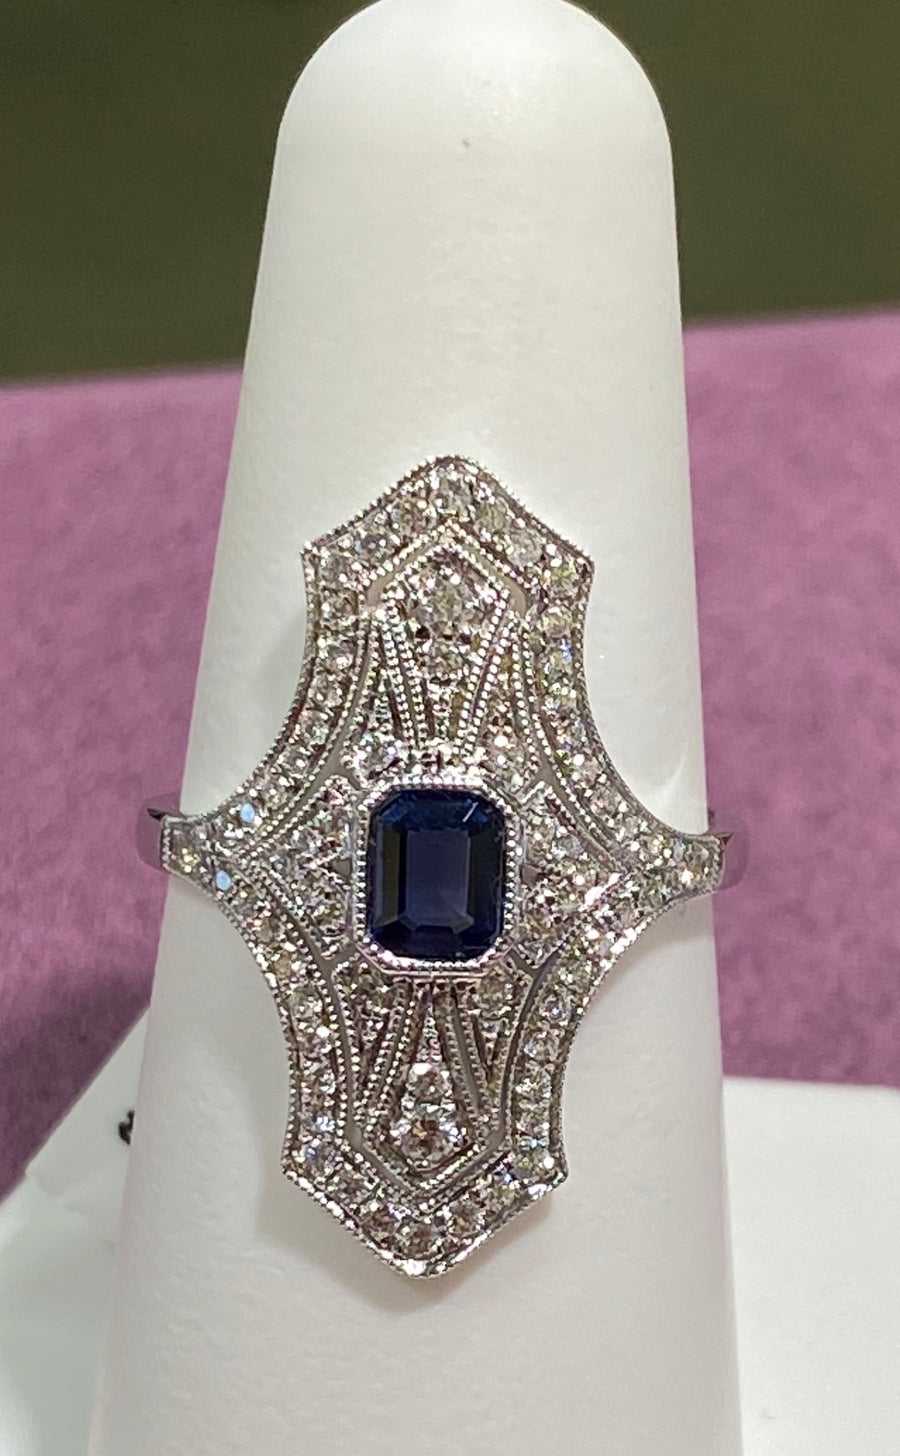 14K white gold atique style sapphire and diamond ring